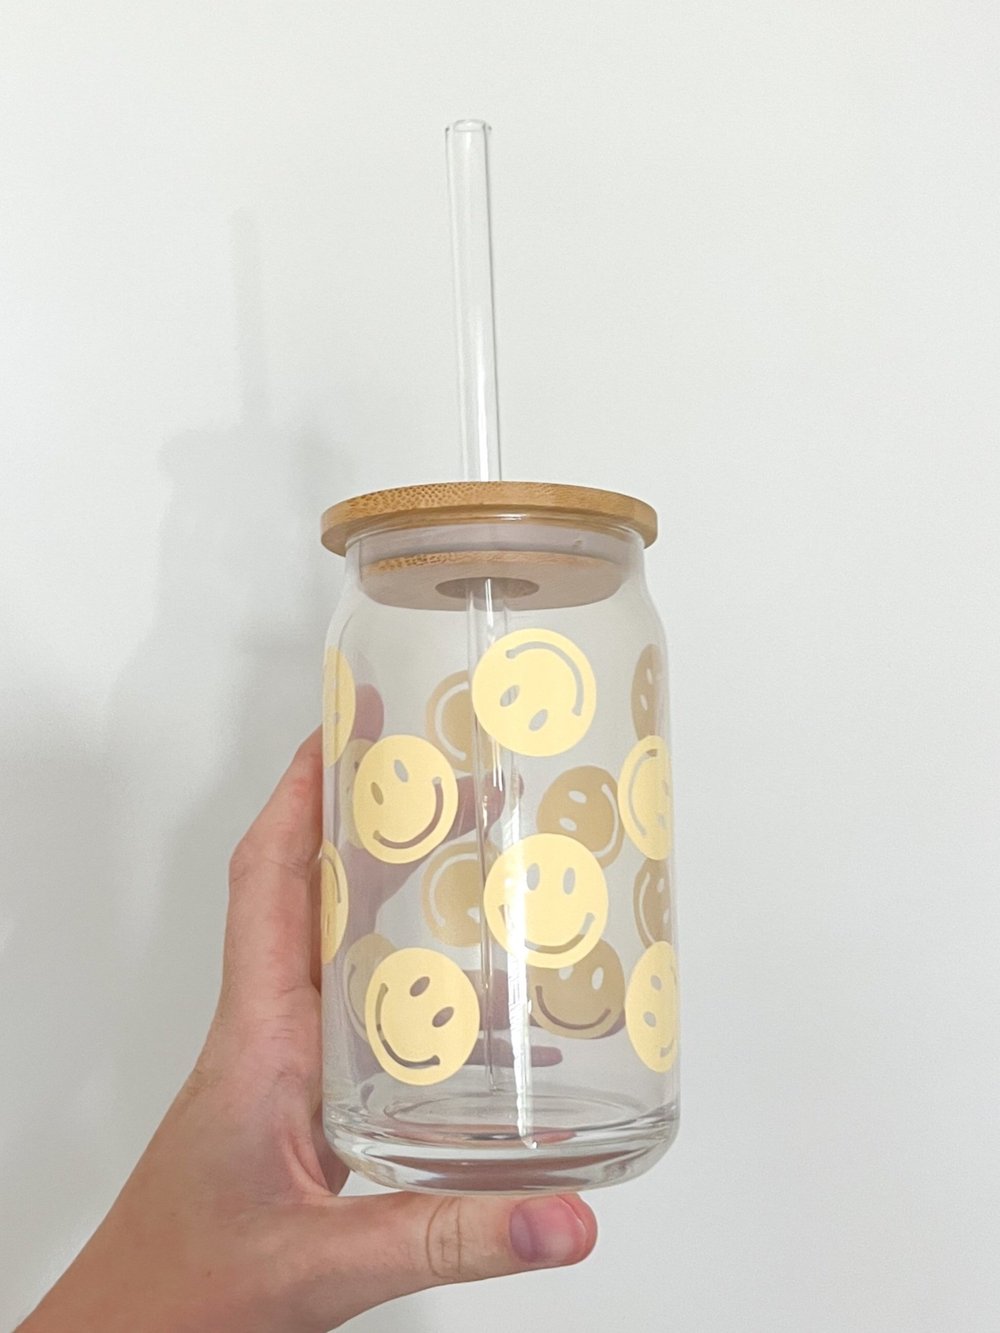 Smiley Face and Heart Coffee Cup With Bamboo Lid & Glass Straw